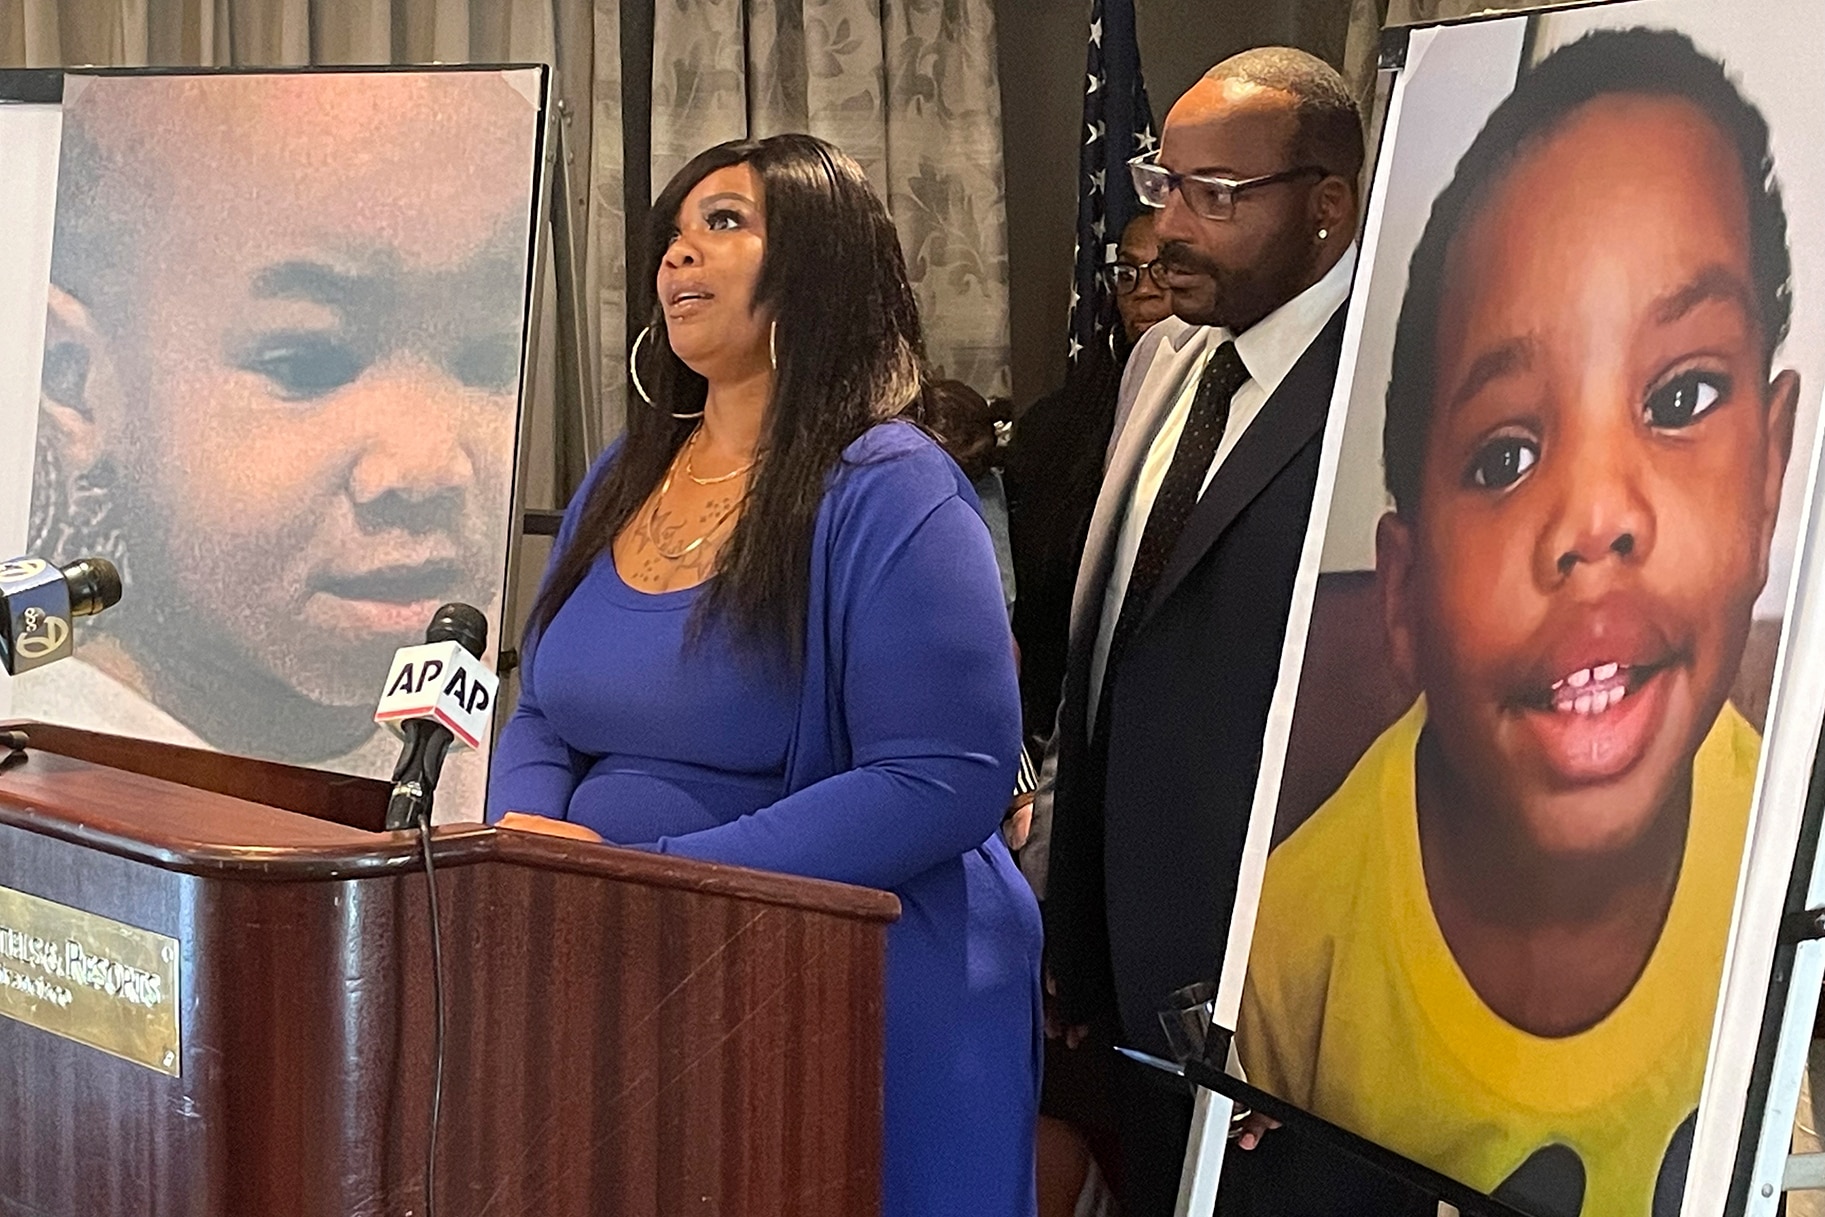 Ryan Dean, the biological mother of two young brothers who were killed while in a foster home